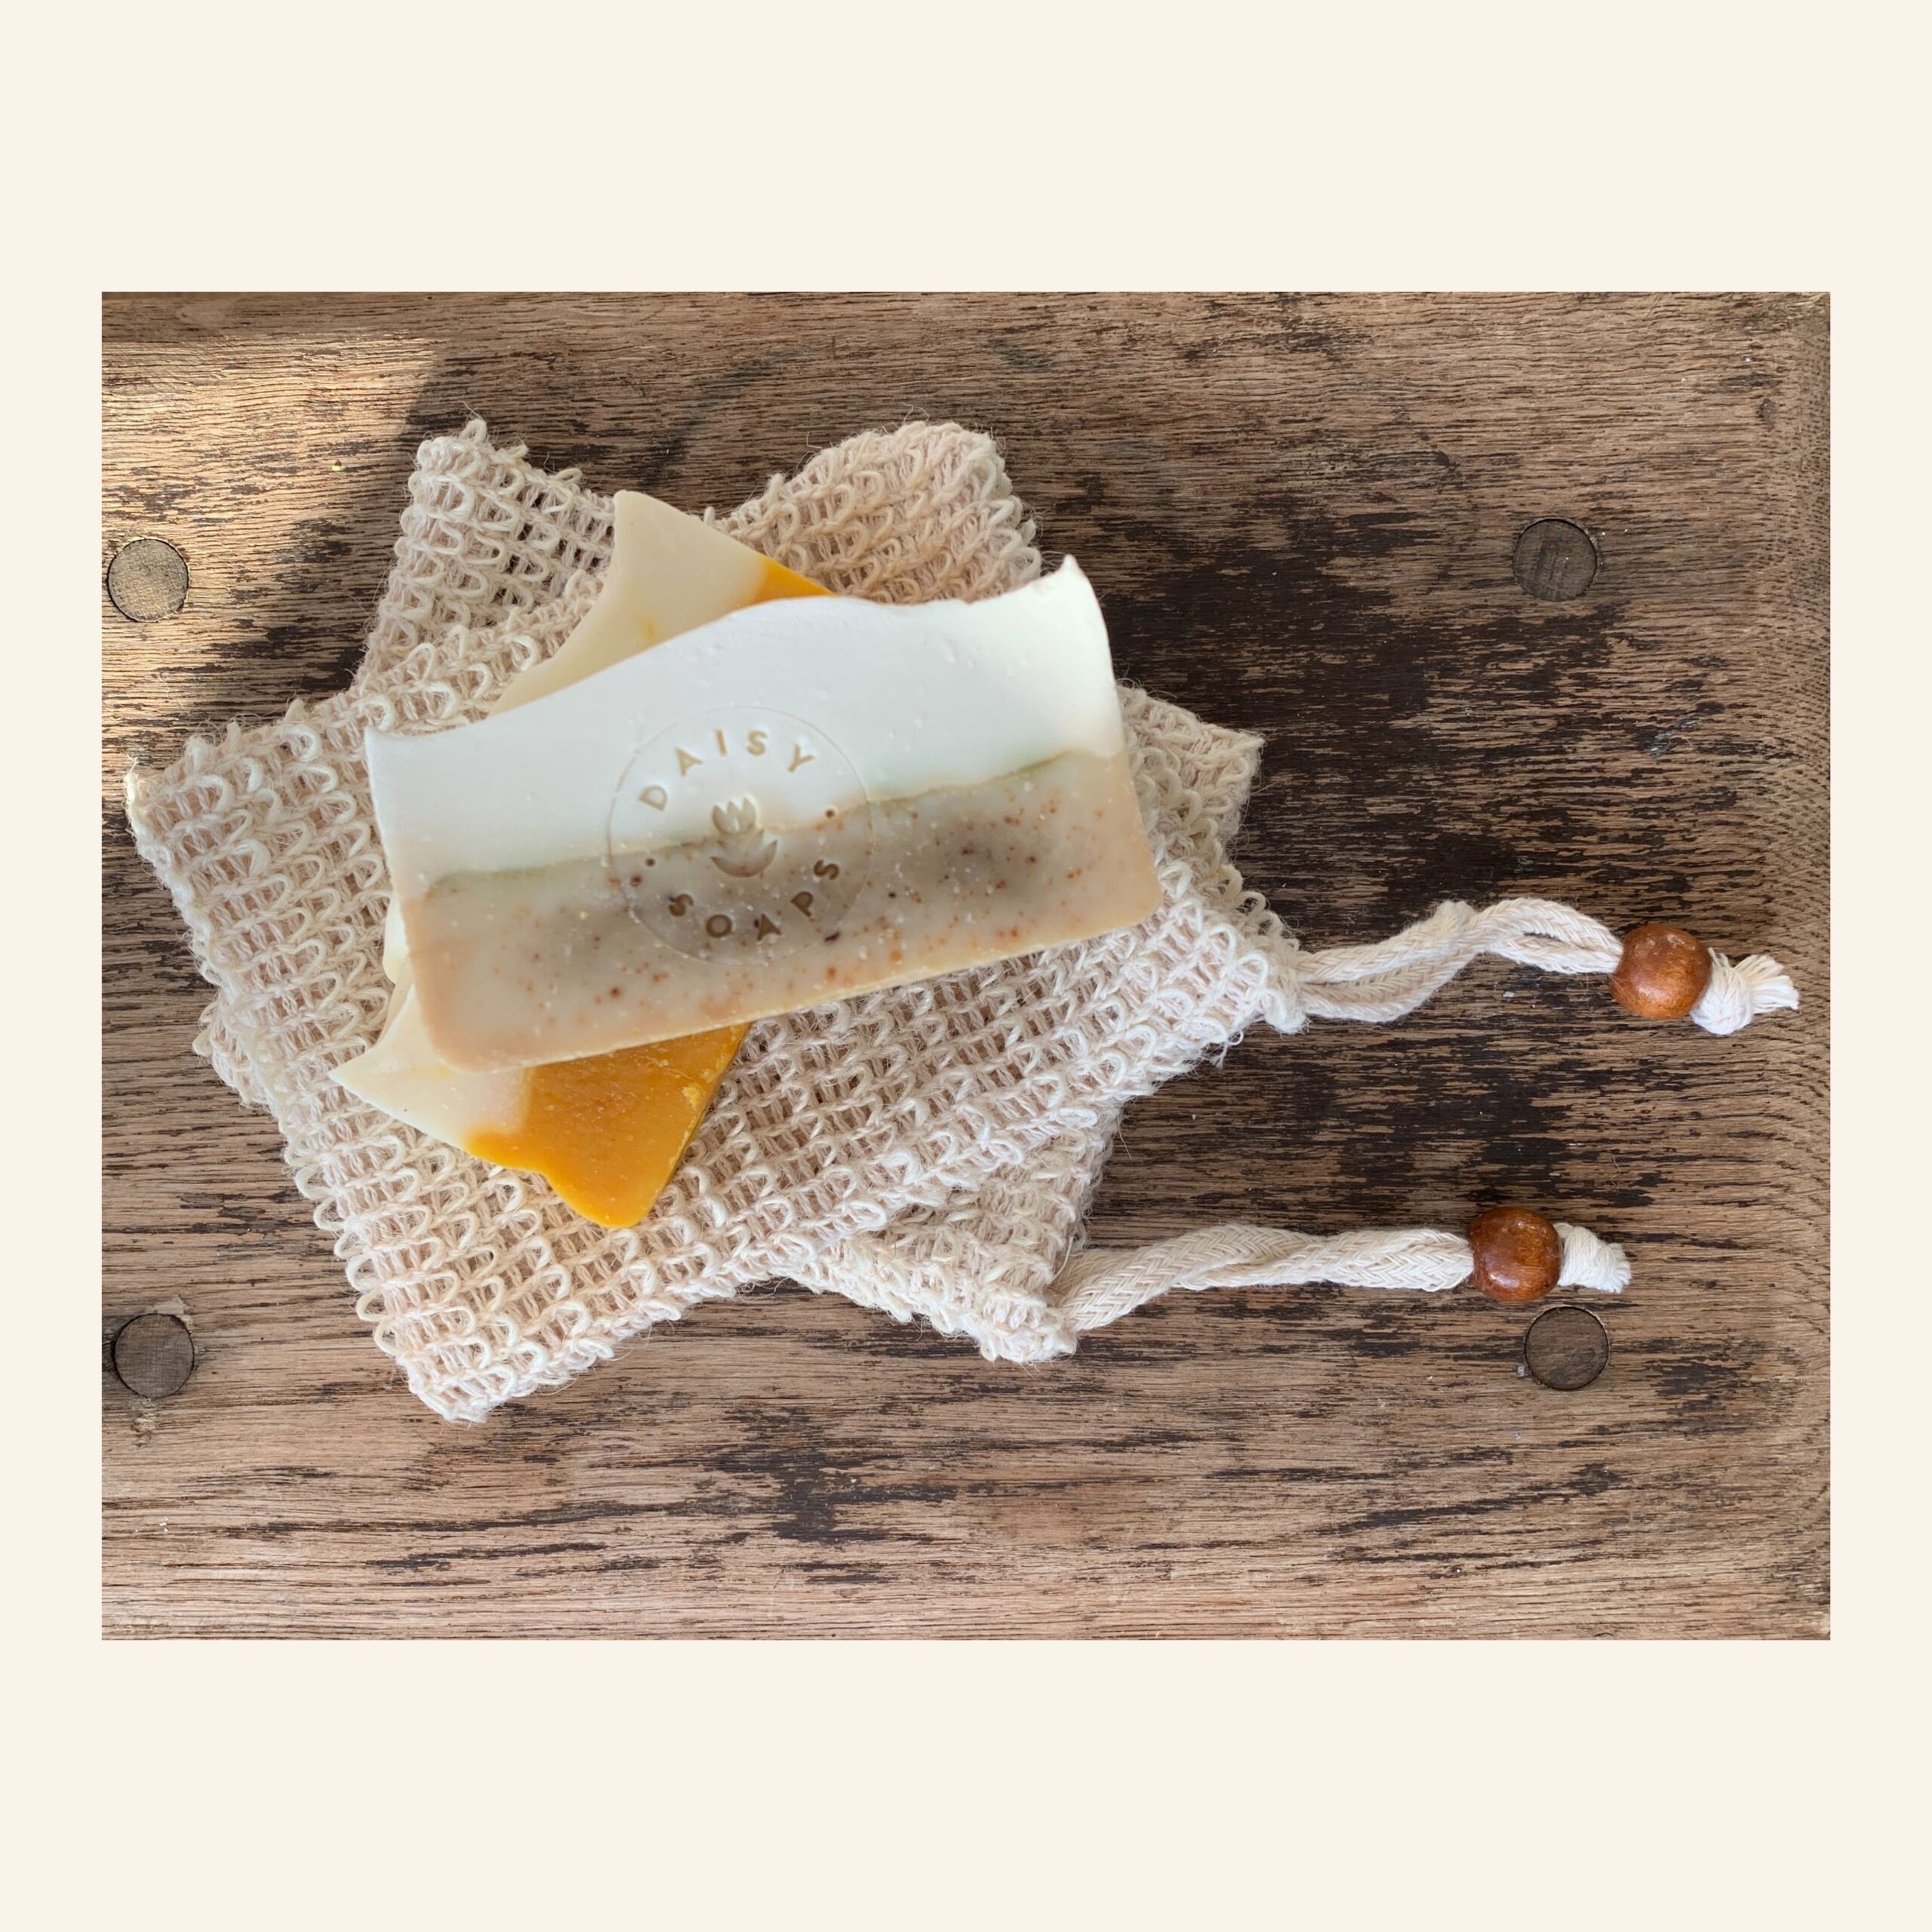 sisal soap bag with daisy soaps